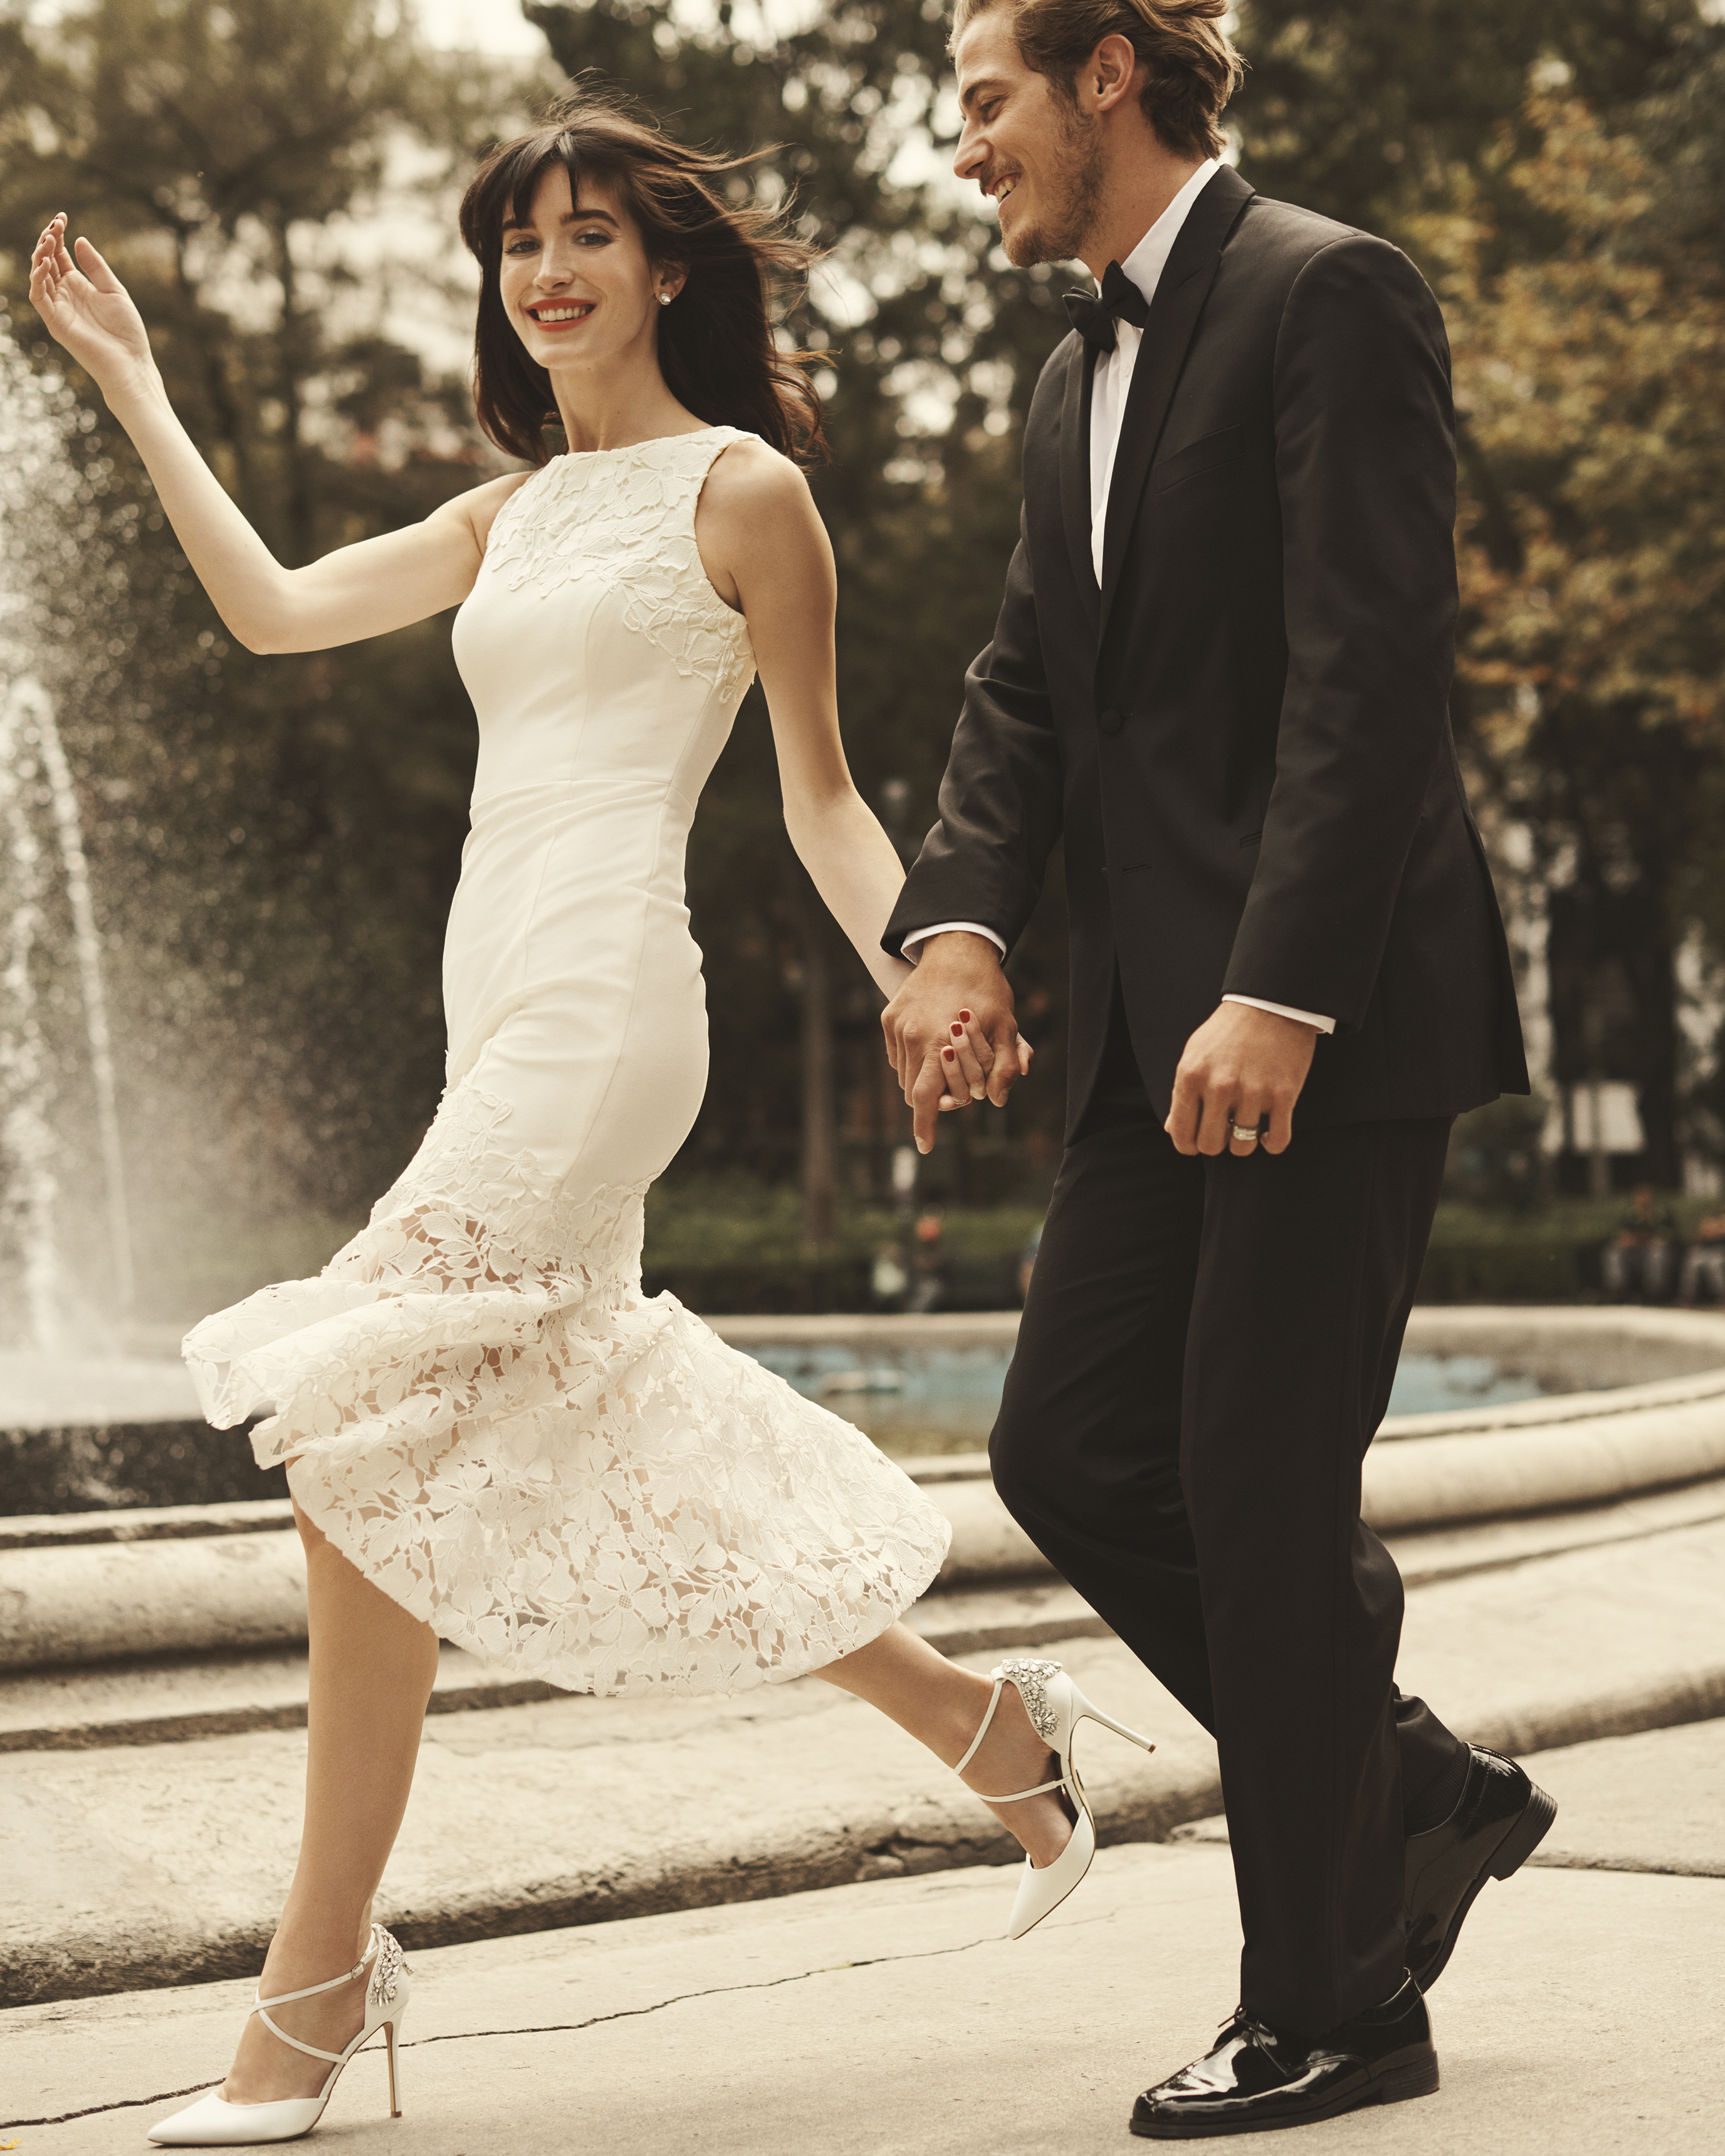 Bride in high-low lace wedding dress running hand in hand with groom in tux